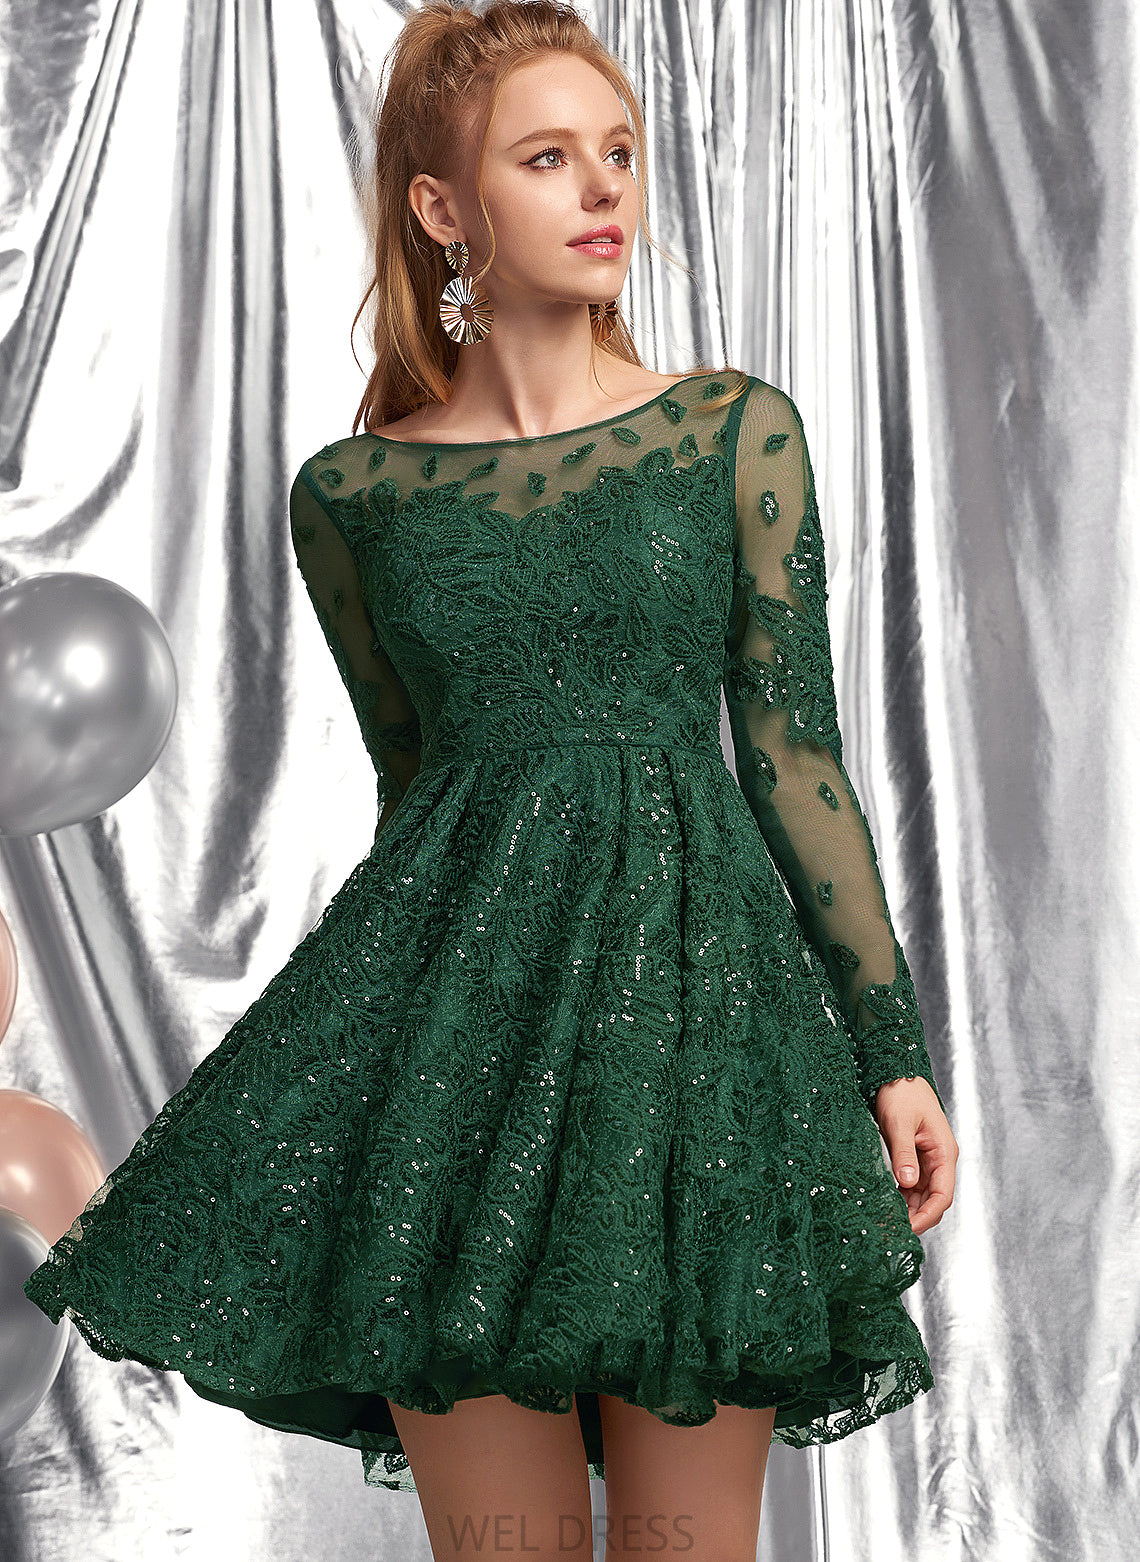 Bridesmaid Blanche Molly Dresses Homecoming Dresses